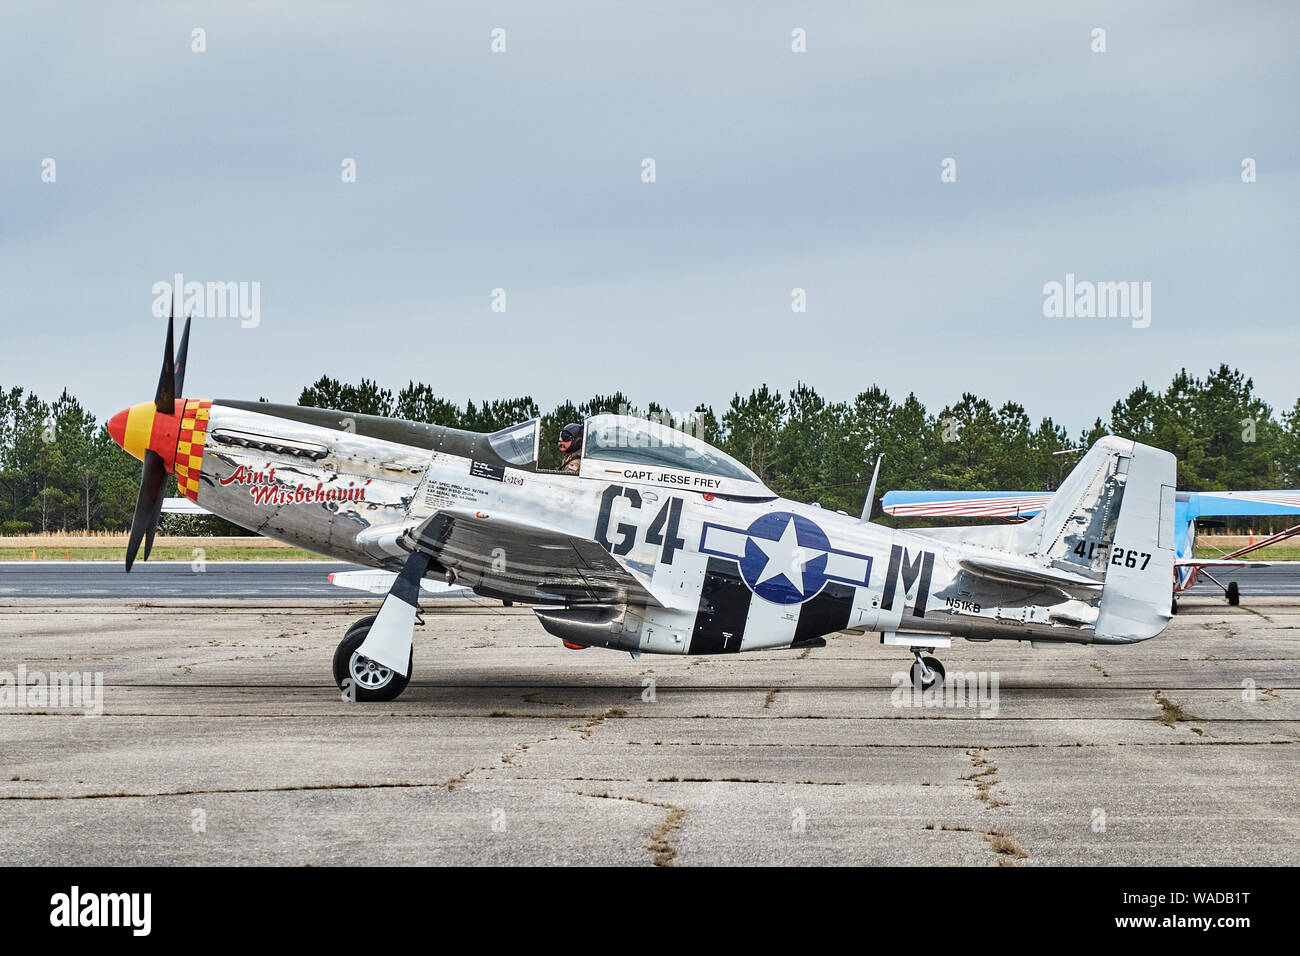 Parked vintage American P 51 Mustang fighter airplane, the Ain't Misbehaven, from WWII era in Bessemer Alabama, USA. Stock Photo